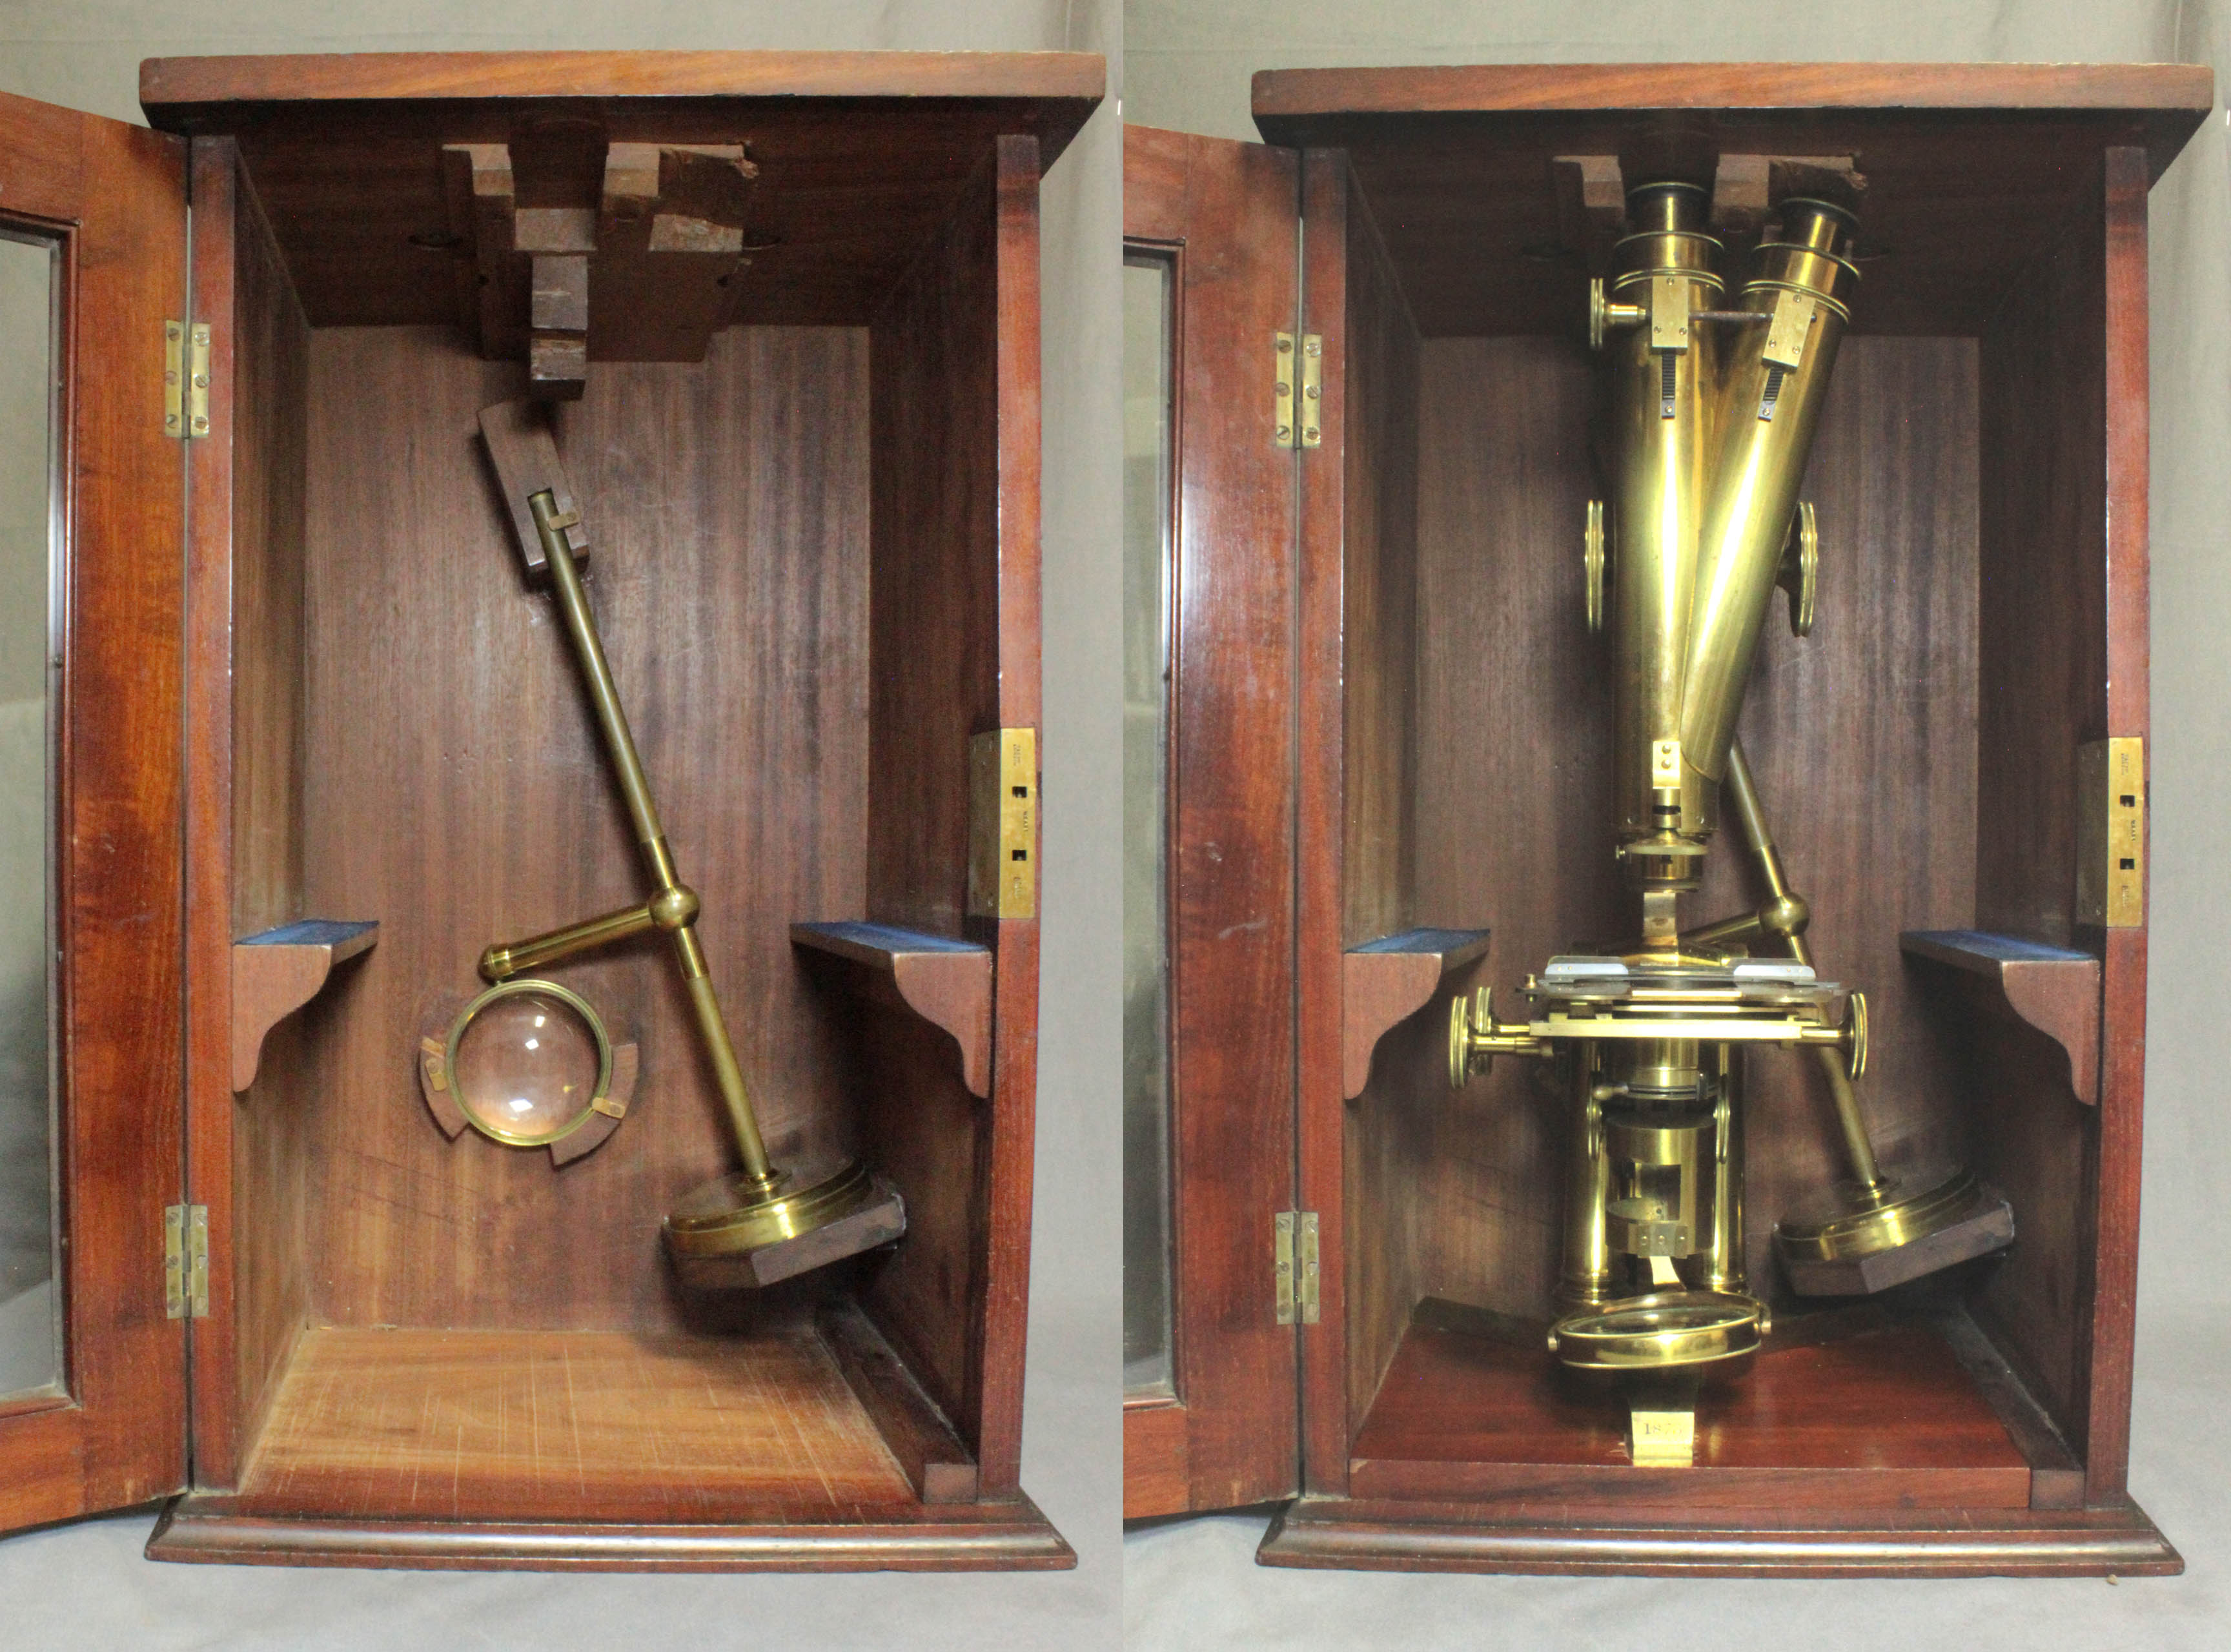 Smith and Beck Best No.1 microscope